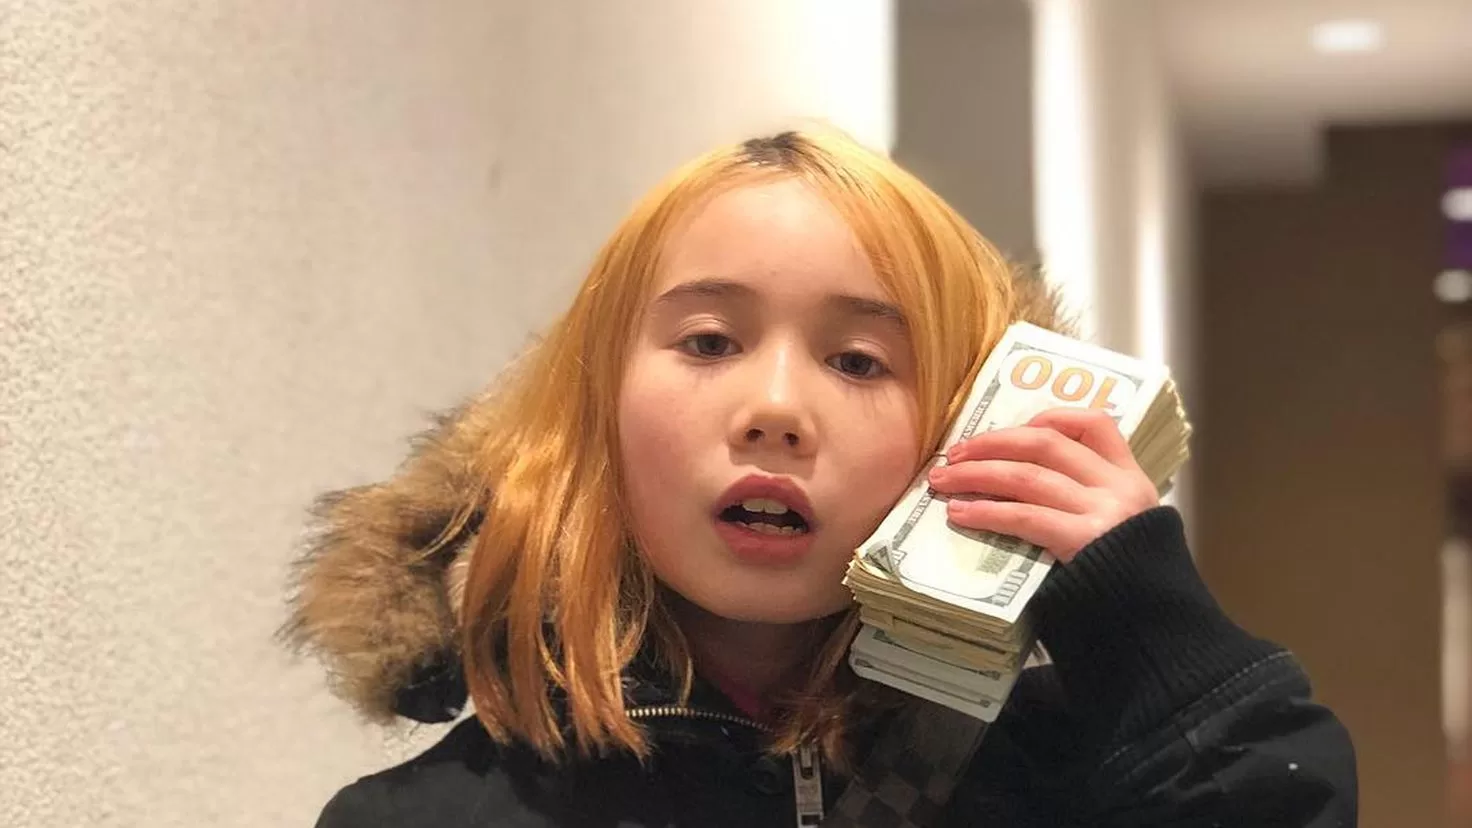 Rapper and influencer Lil Tay dies at 14
